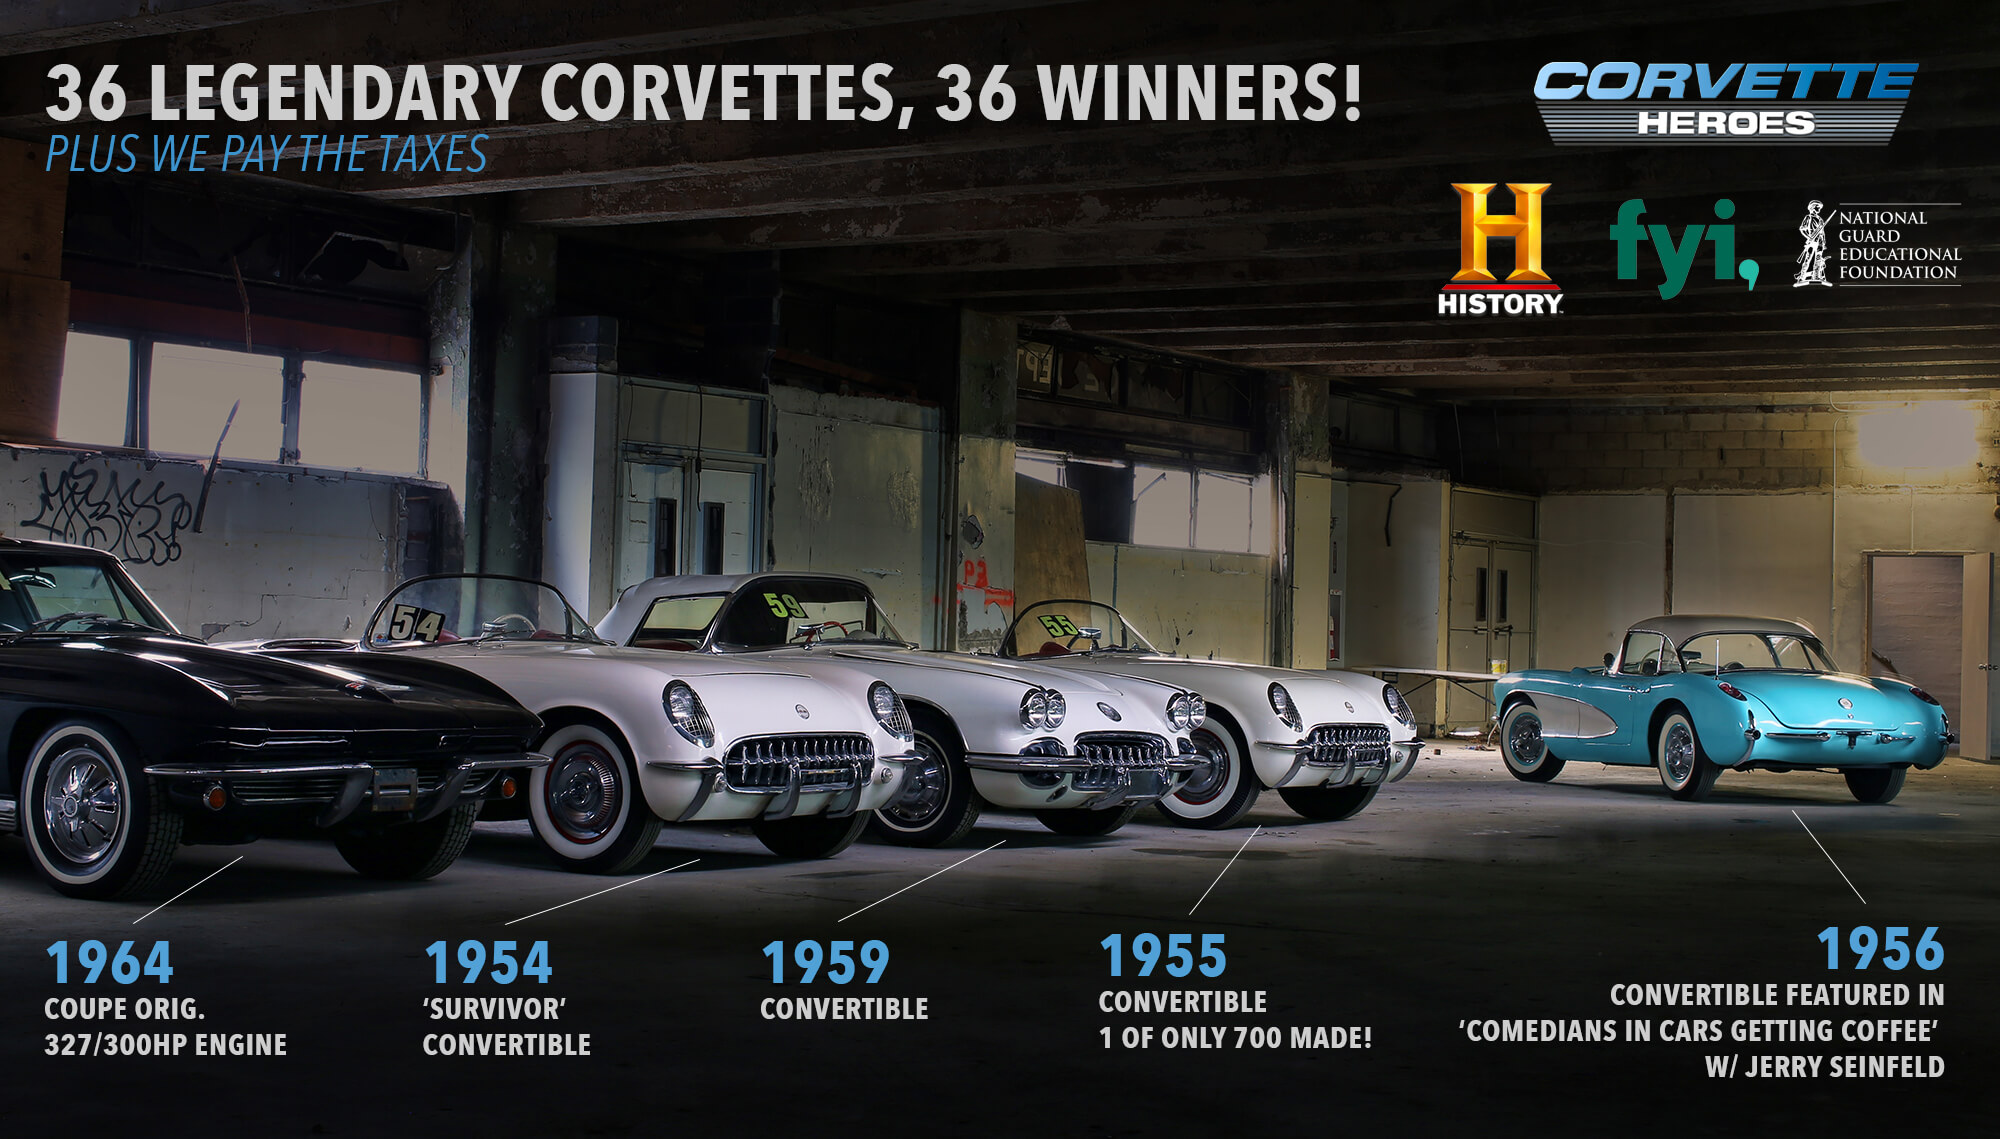 The History Channel will host a special about the Peter Max Corvette Collection later this month.